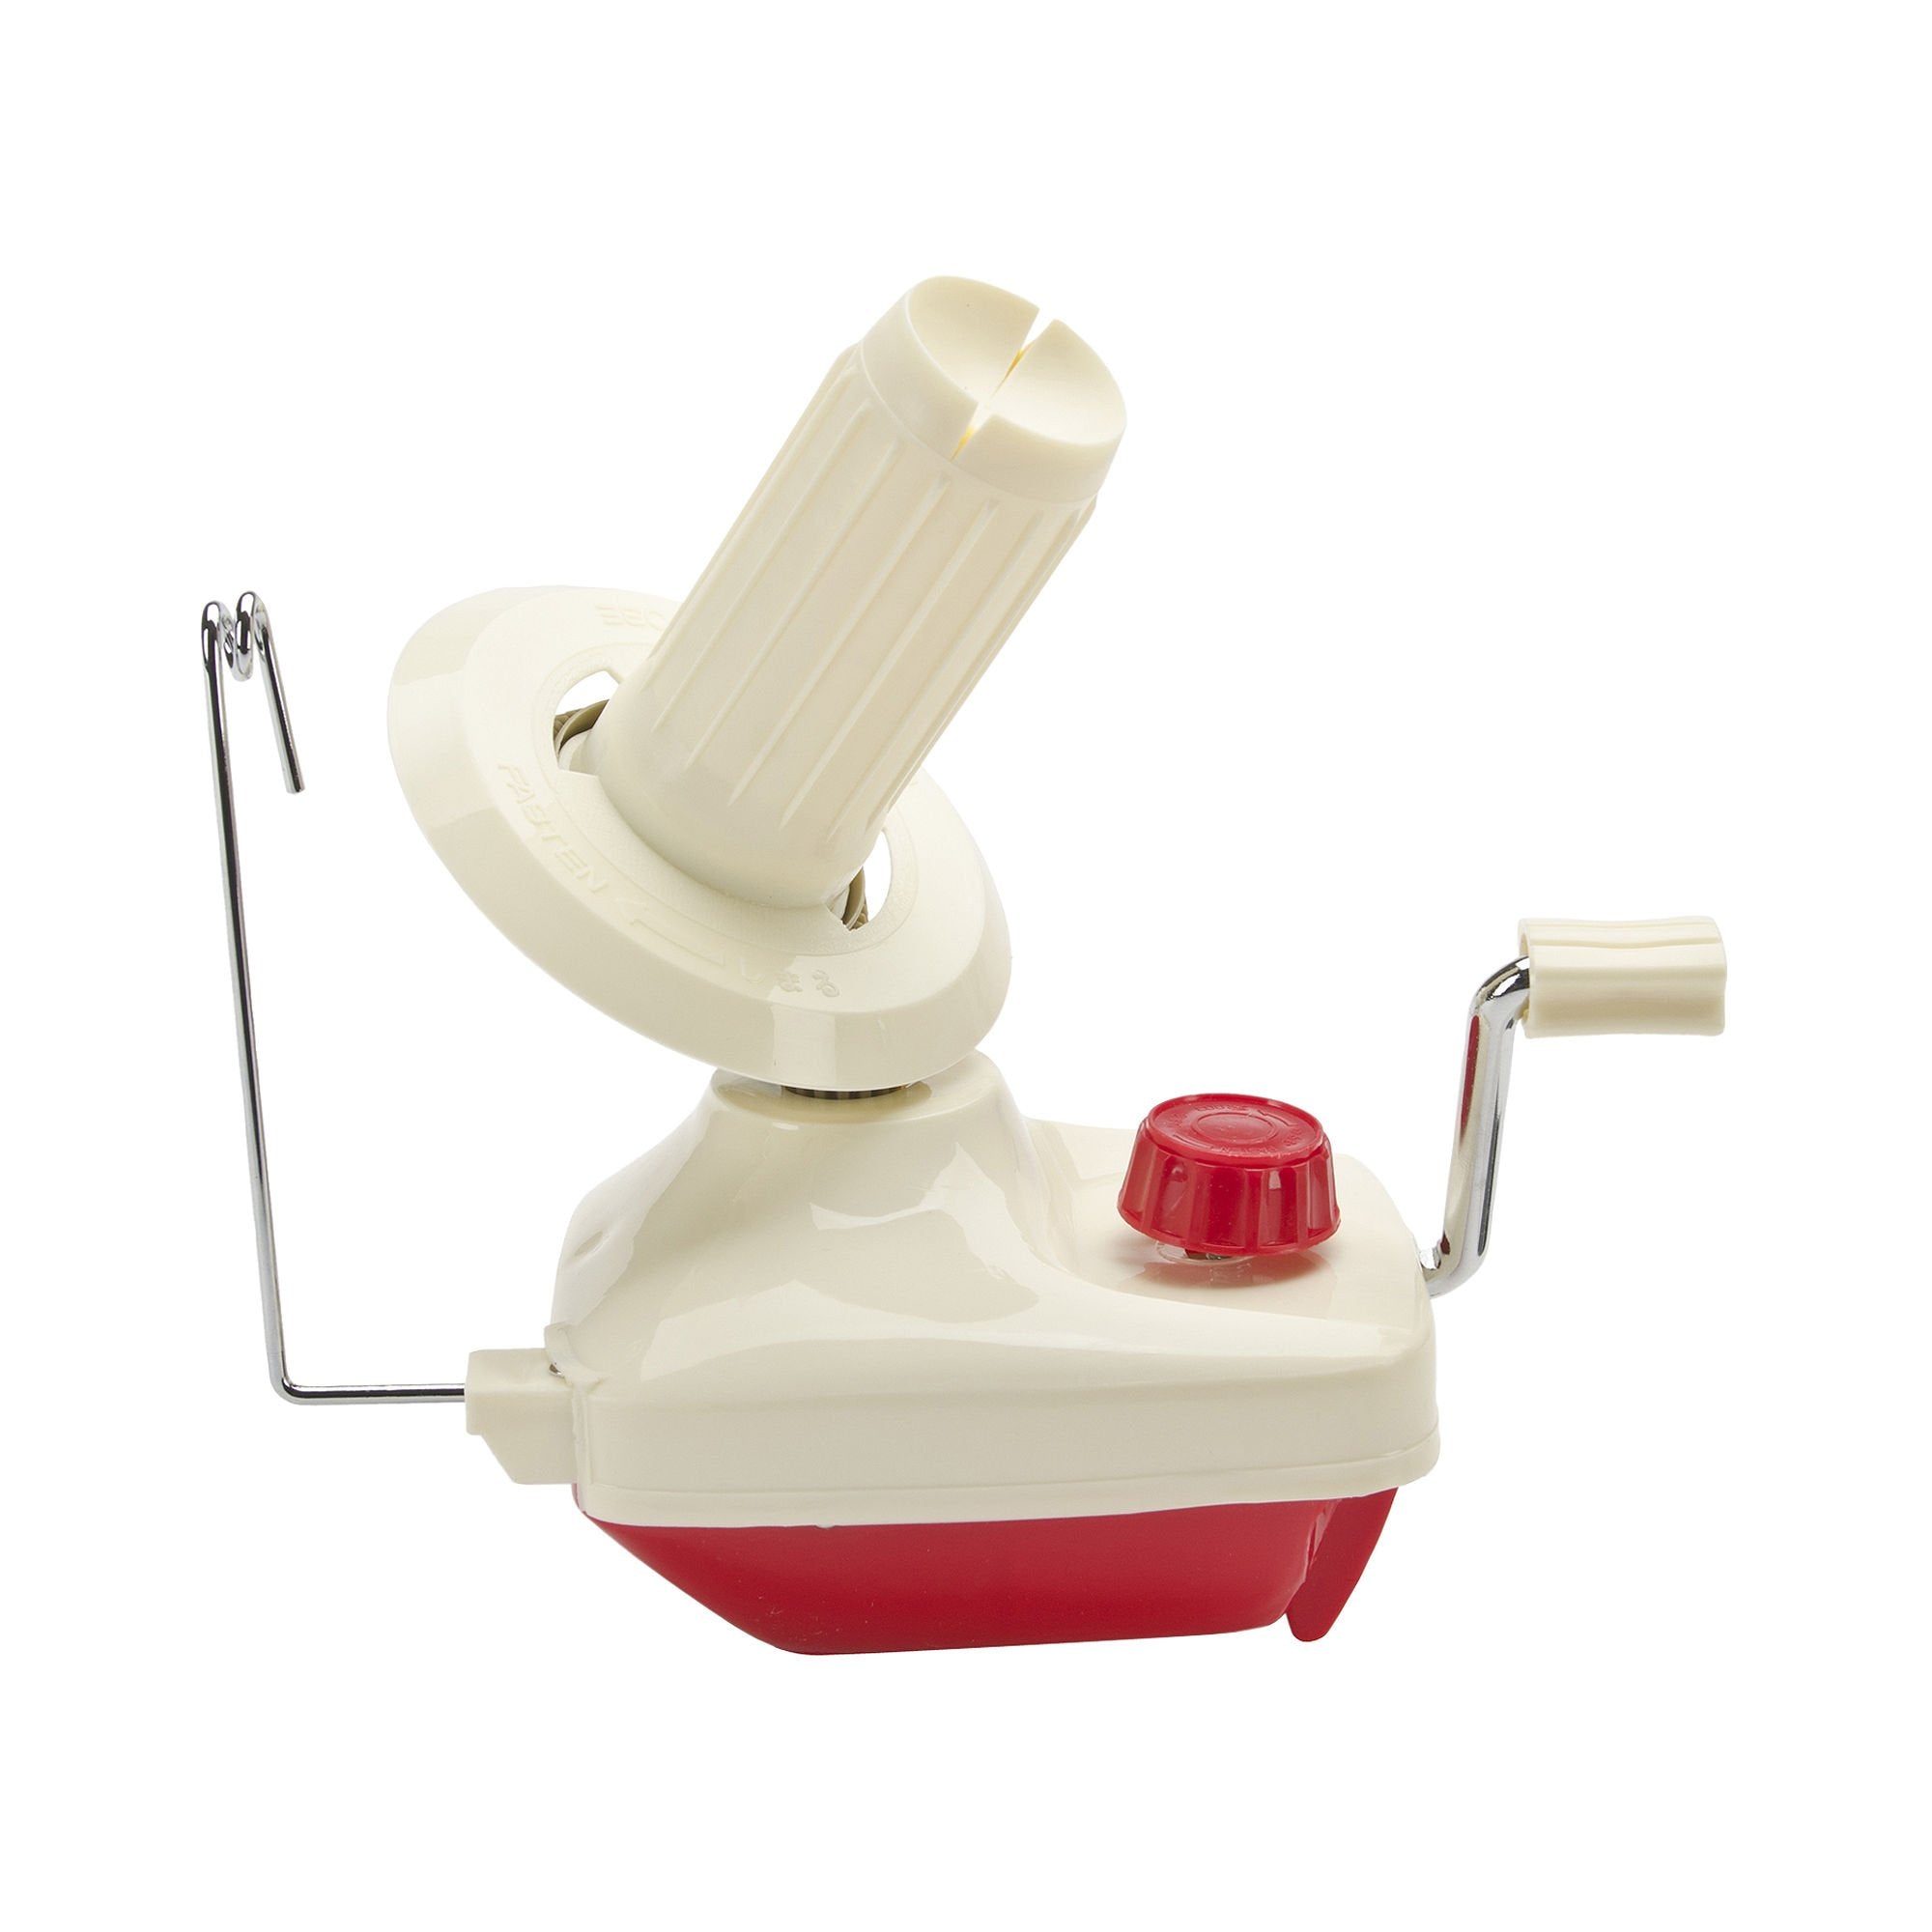 Ball Winder from Lacis